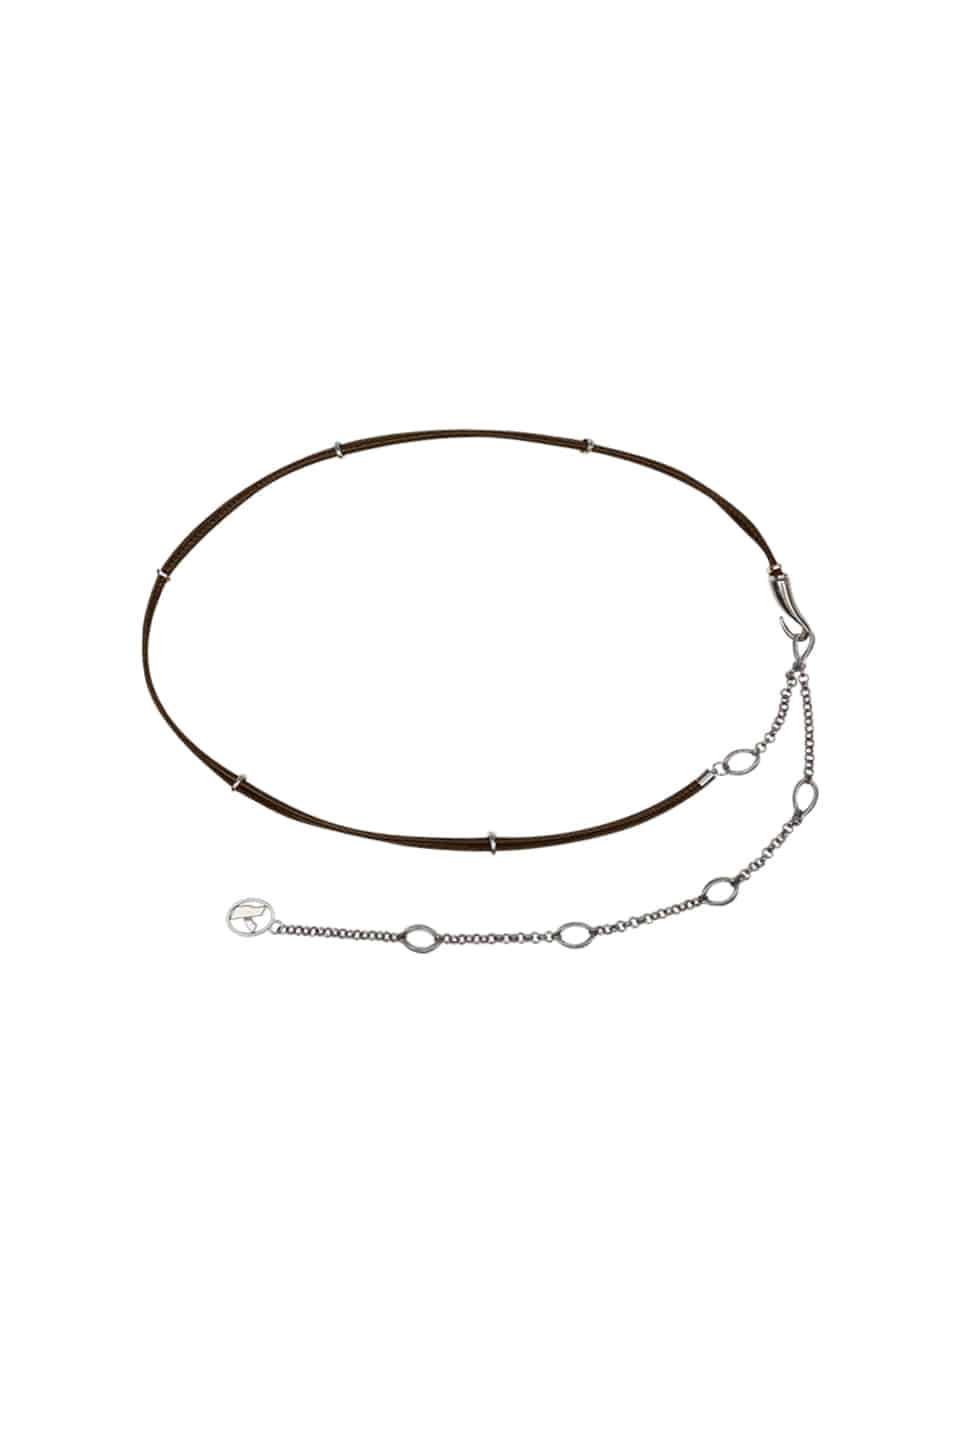 HOOK LEATHER CHAIN STRING - BROWN